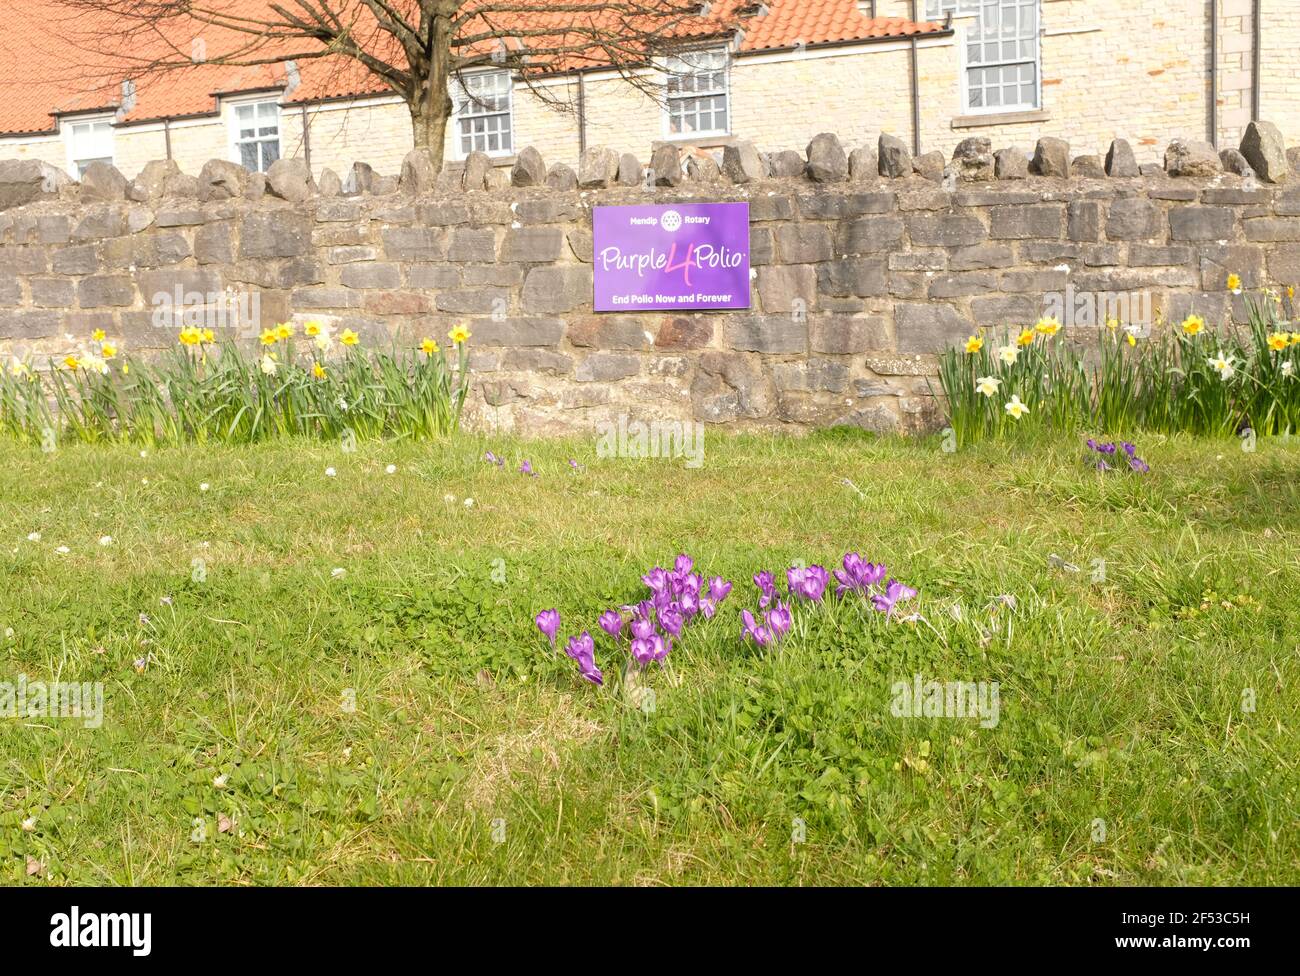 March 2021 - Crocus plants in front of Purple4Polio charity sign Stock Photo